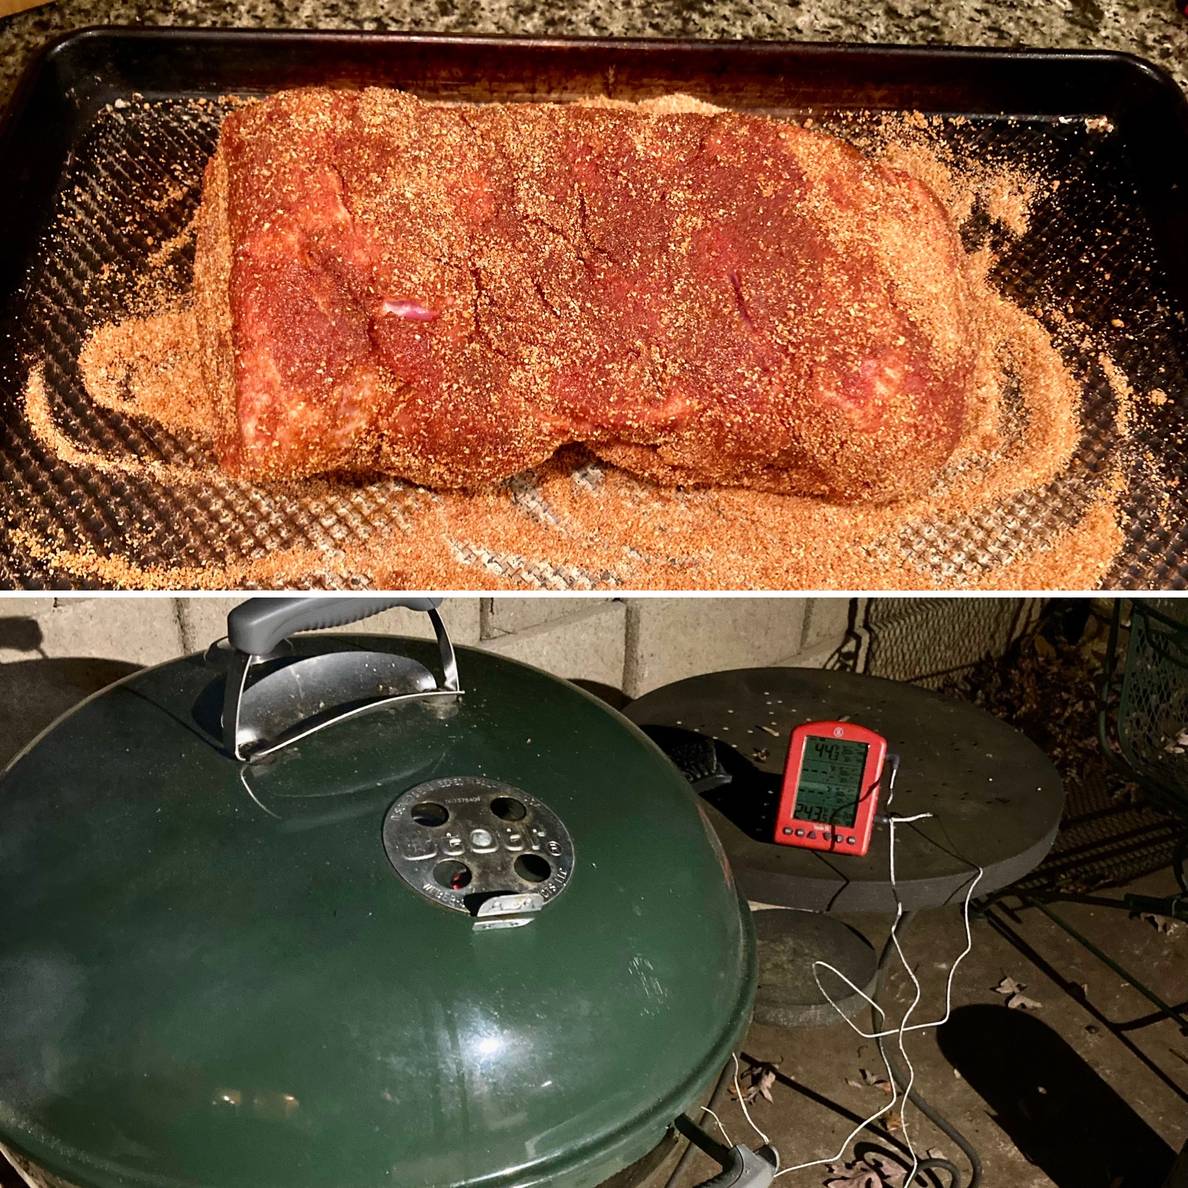 Two photos. One is a raw dry-rubbed pork butt inside on a sheet pan. The other is a Weber grill outside. Cables lead from the grill to a temperature display.